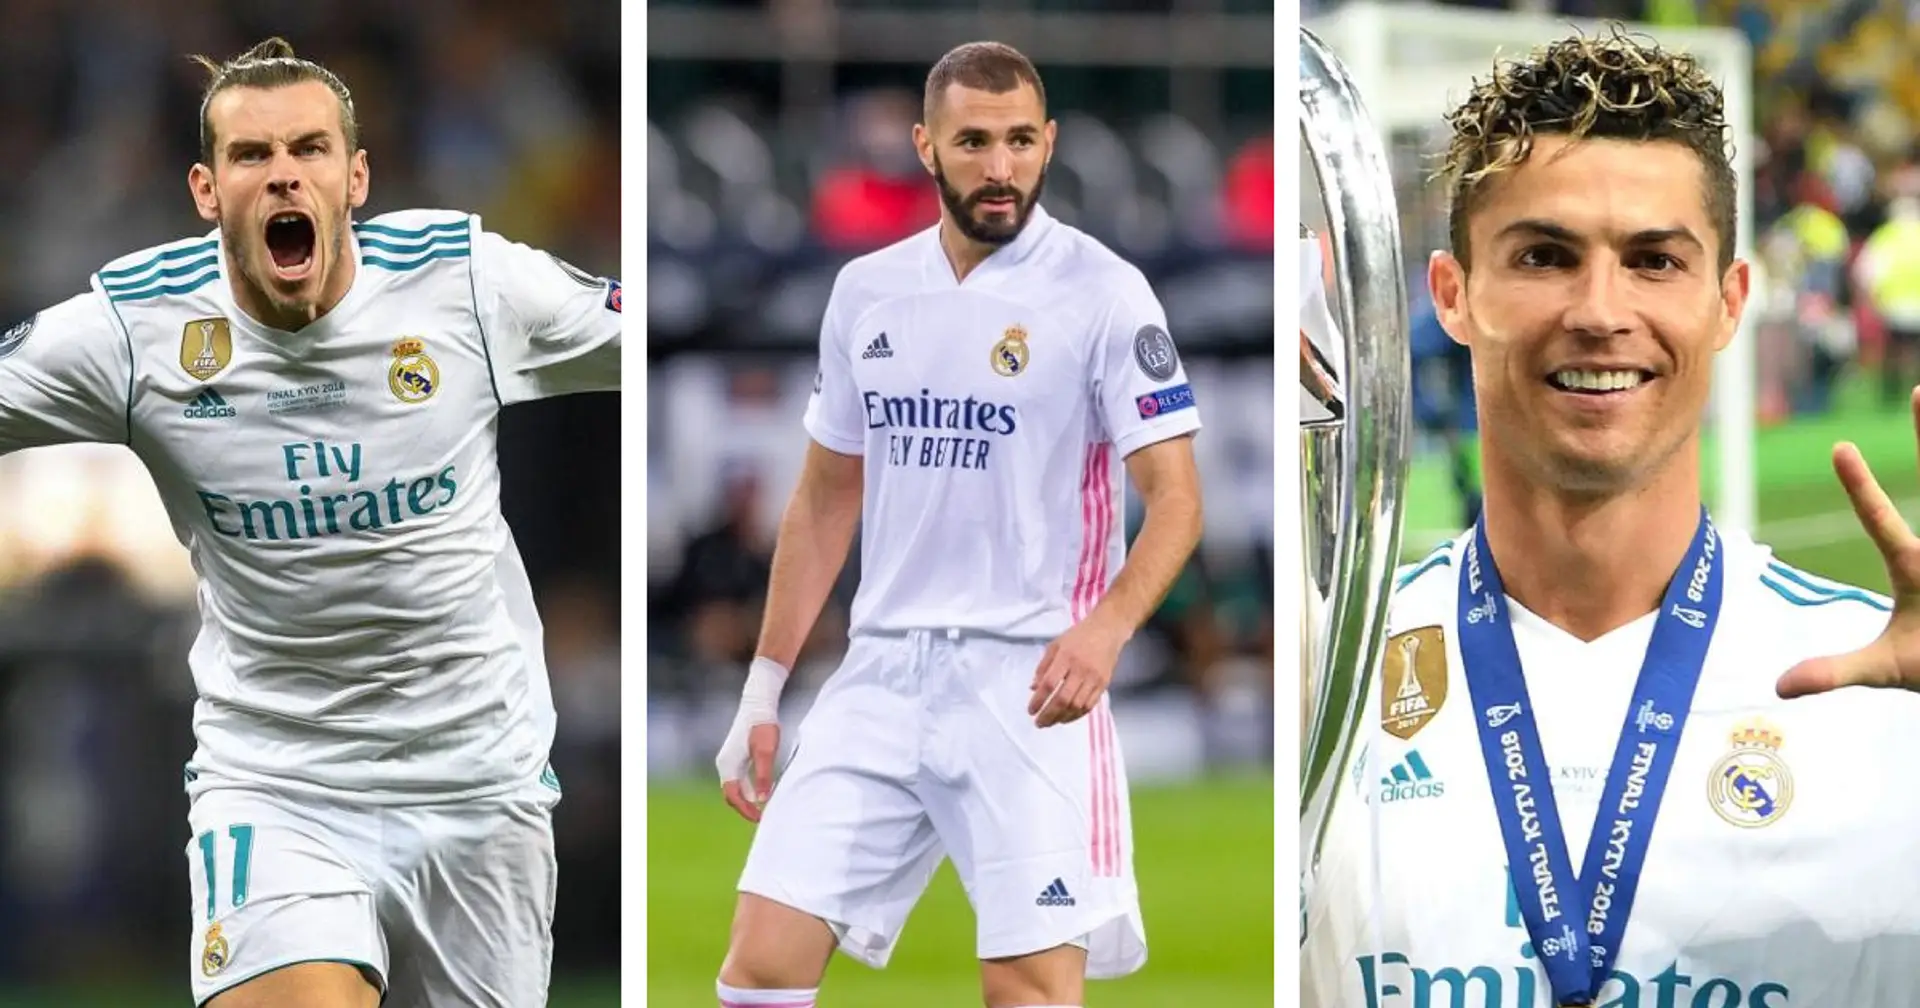 'We did well in the past because we had Ronaldo, Bale': Madrid fan explains why Benzema is not meant to be our No.9 